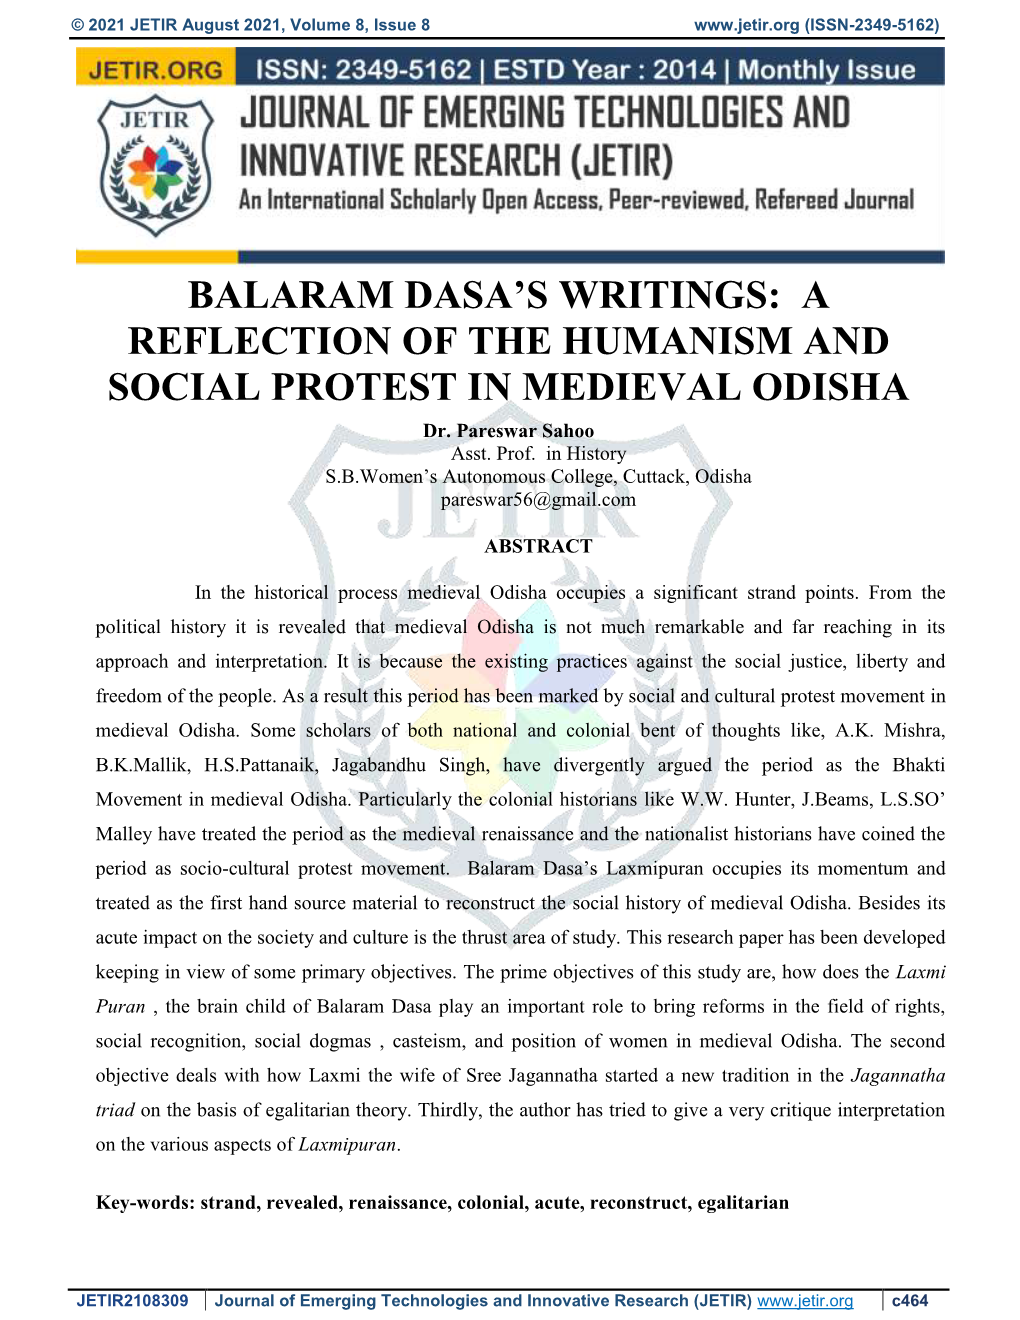 A REFLECTION of the HUMANISM and SOCIAL PROTEST in MEDIEVAL ODISHA Dr